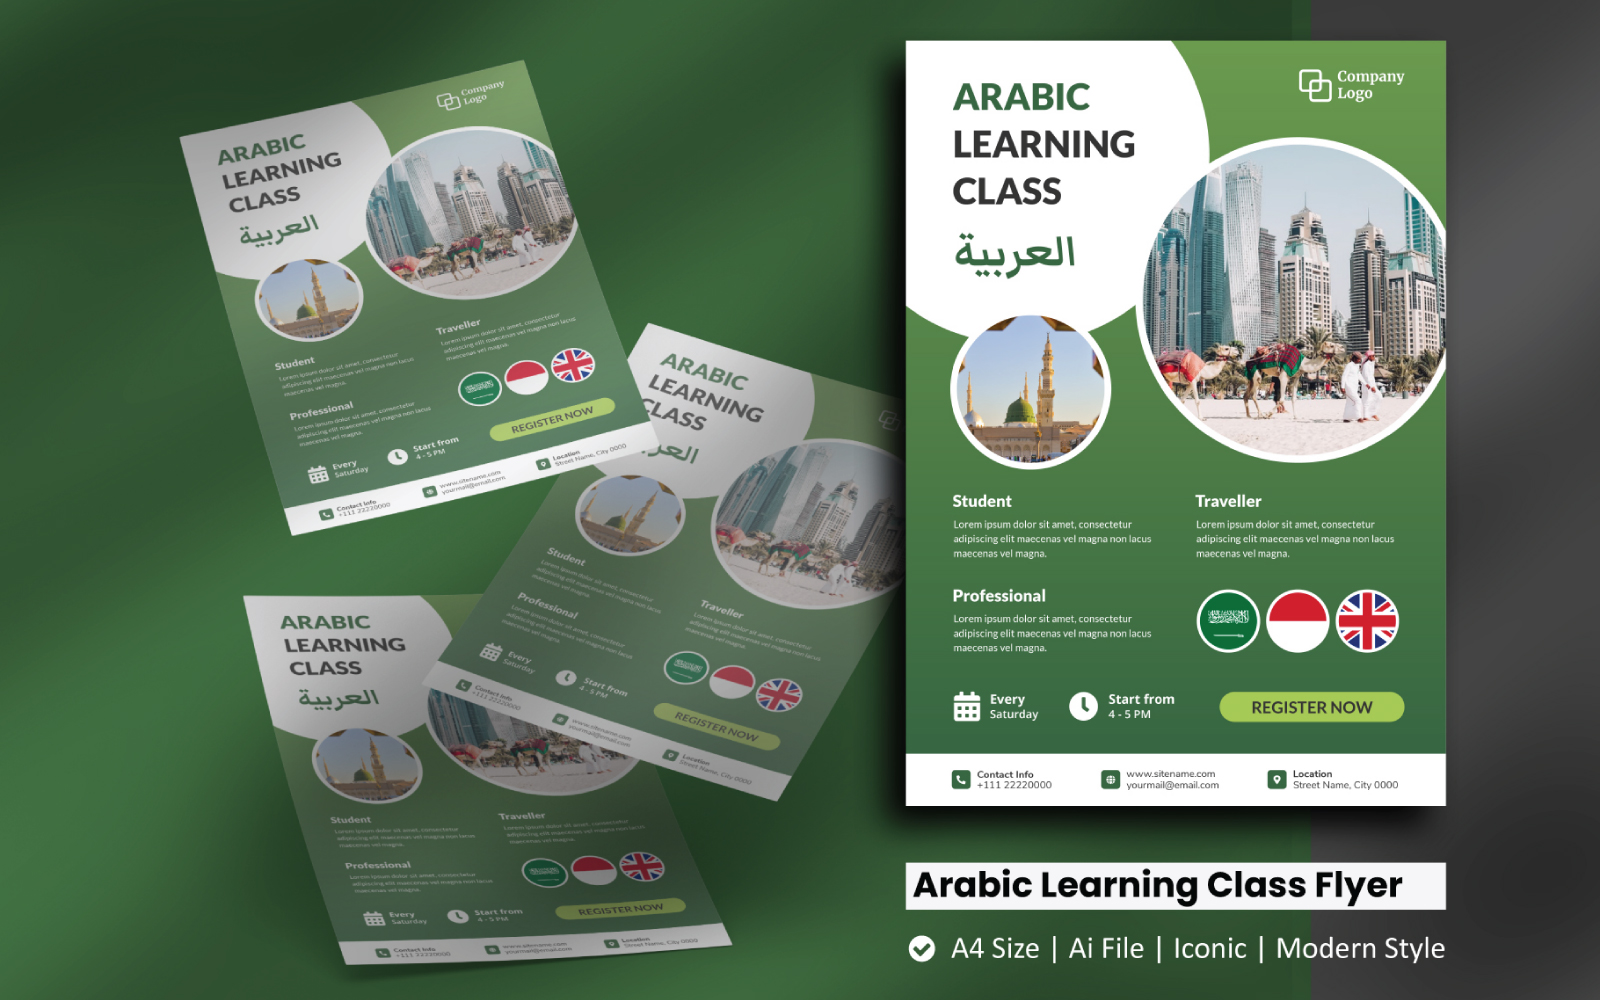 Arabic Learning Class Flyer Corporate Identity Template